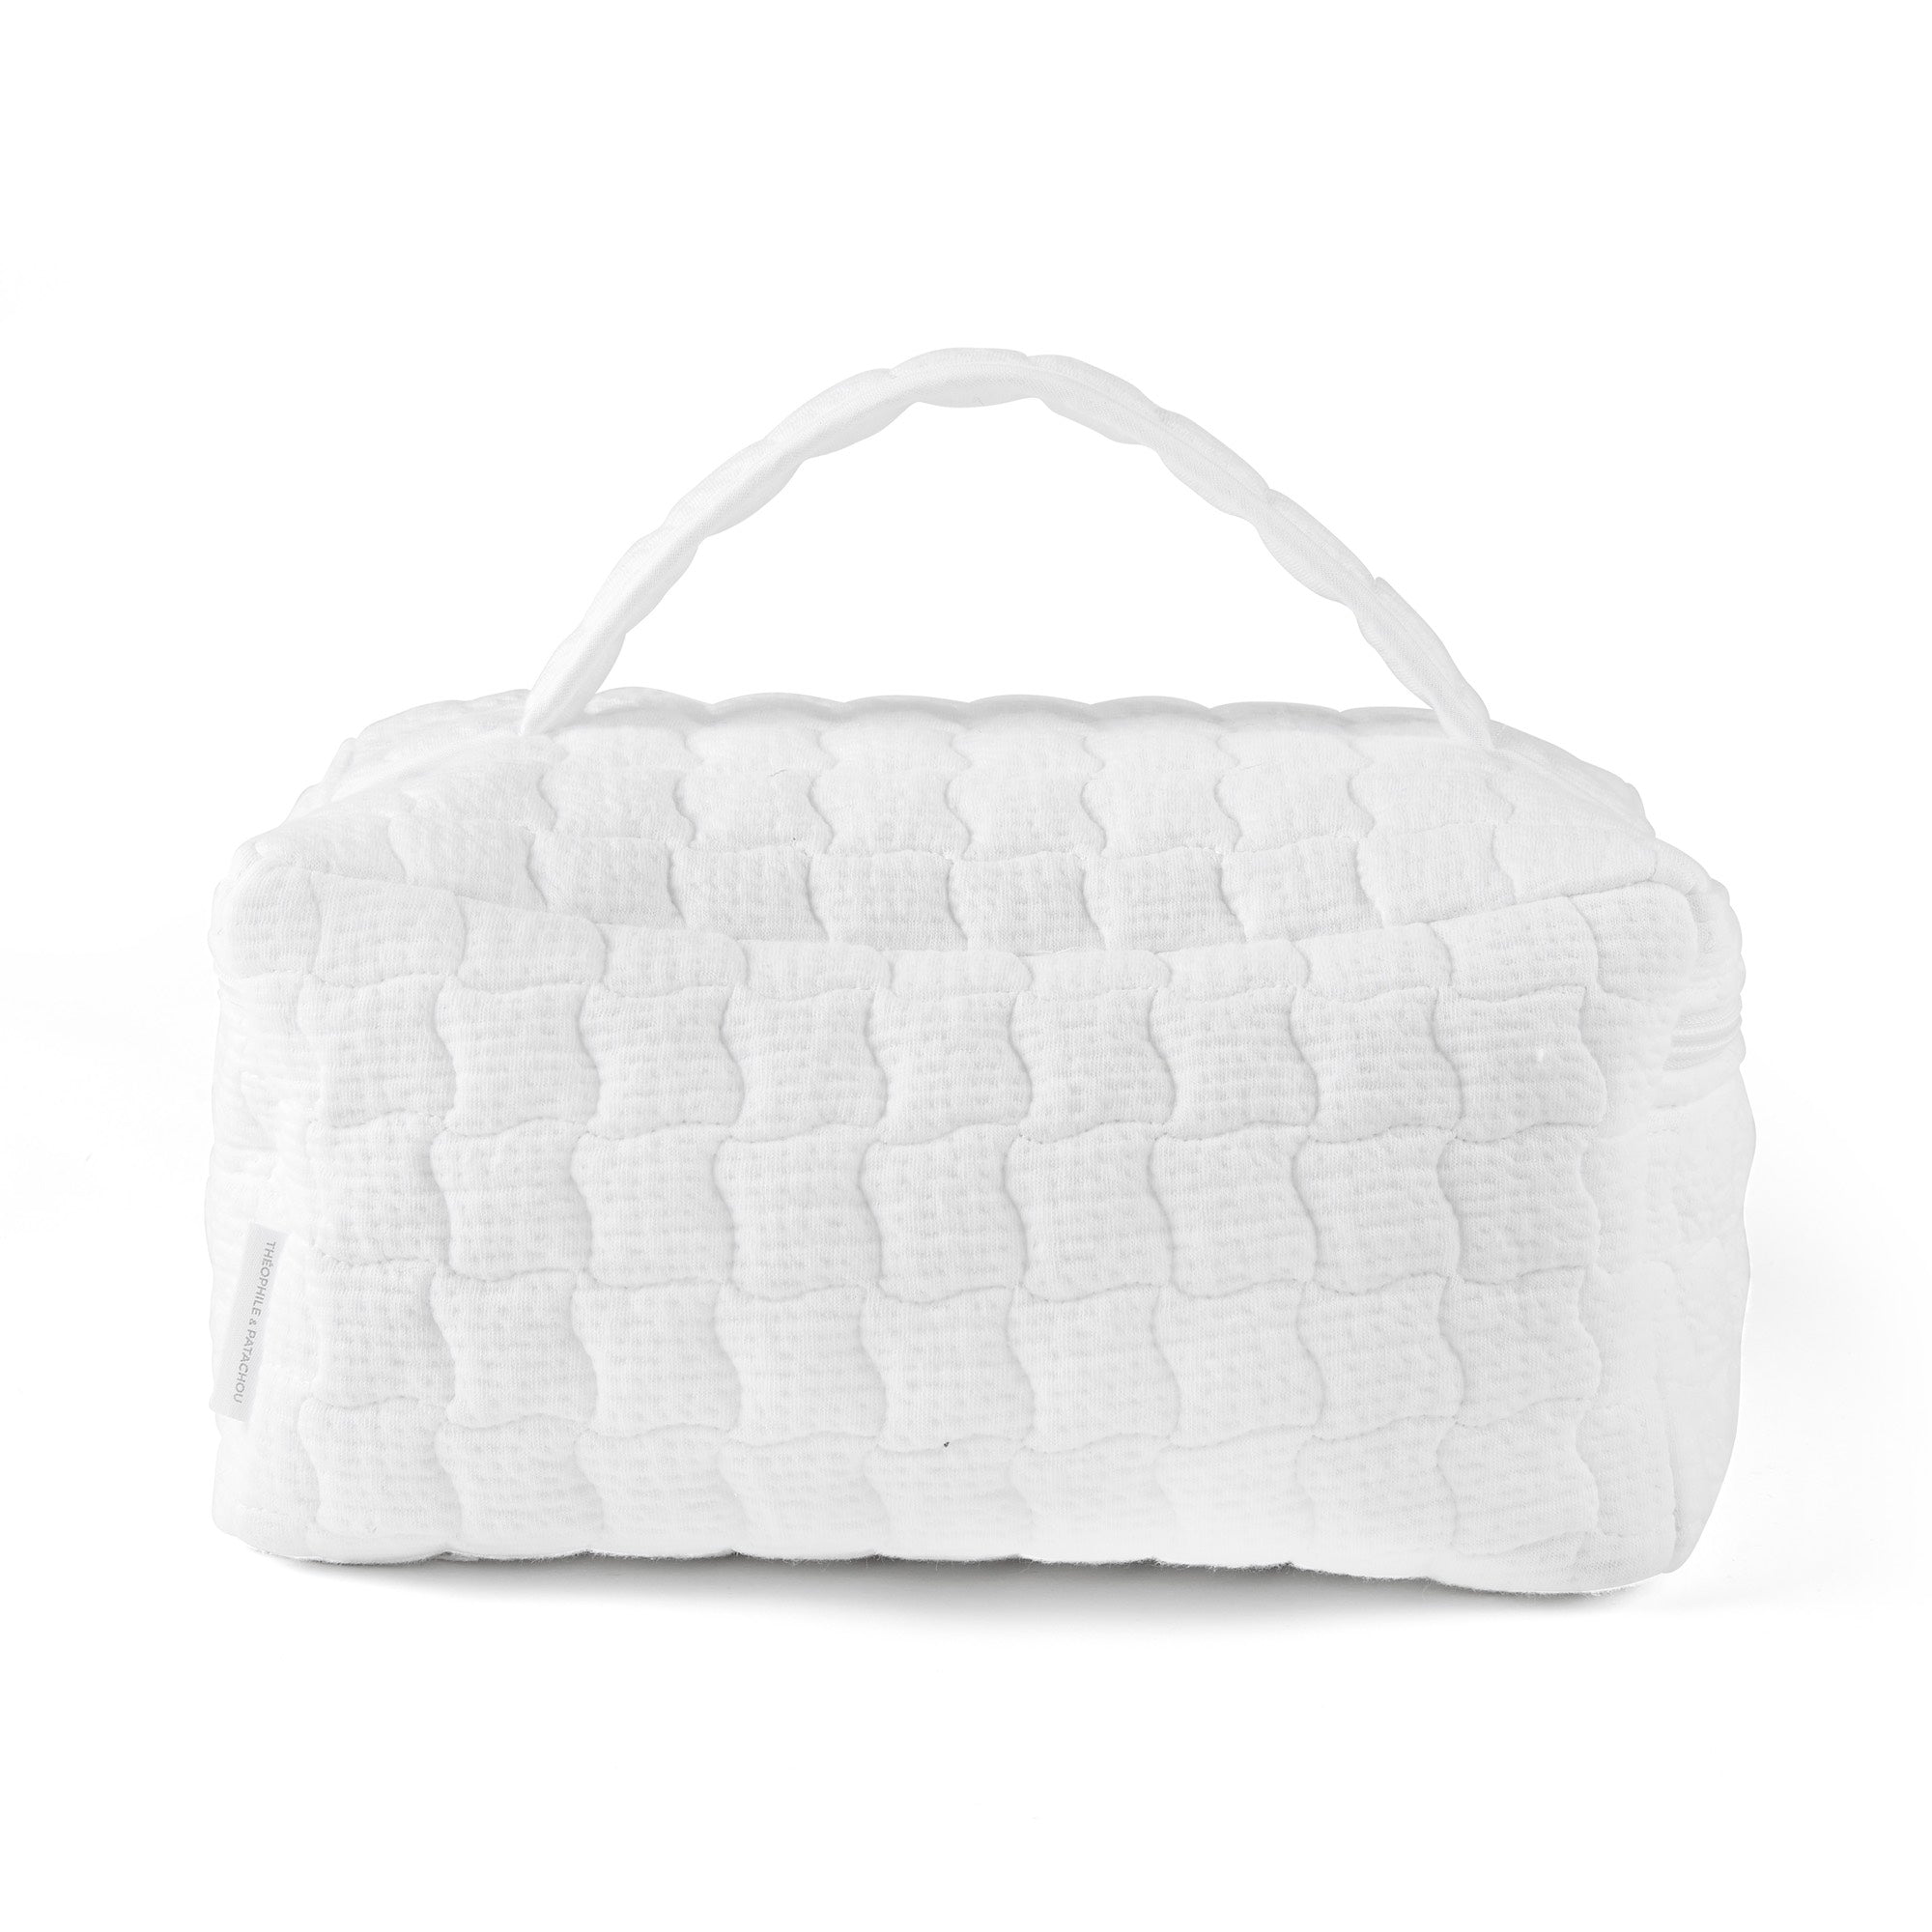 Theophile & Patachou Toiletry Bag with a Handle - Cotton White